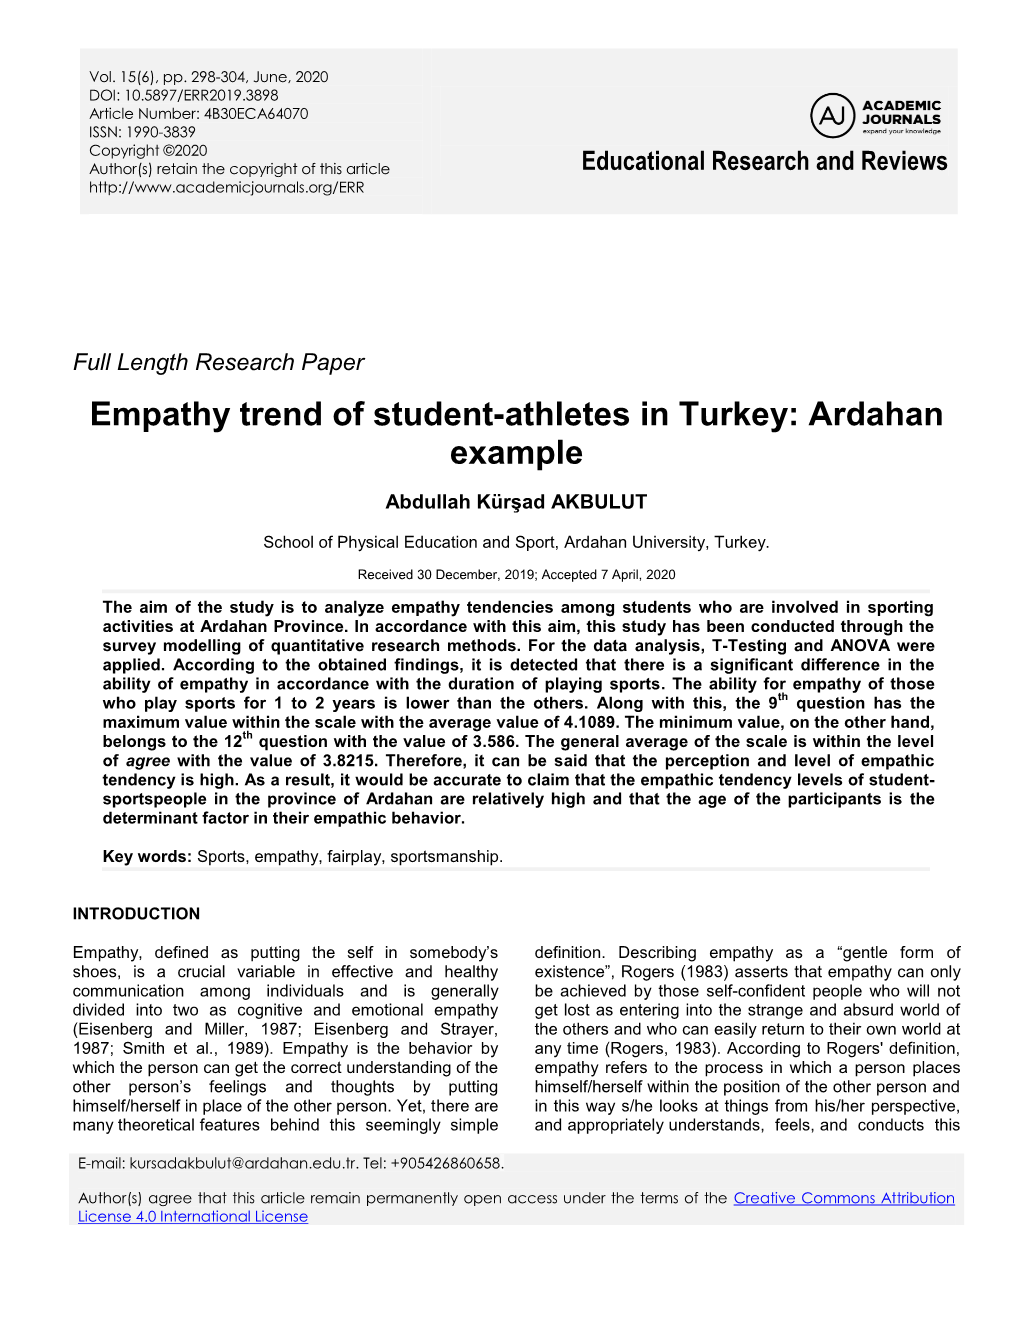 Empathy Trend of Student-Athletes in Turkey: Ardahan Example